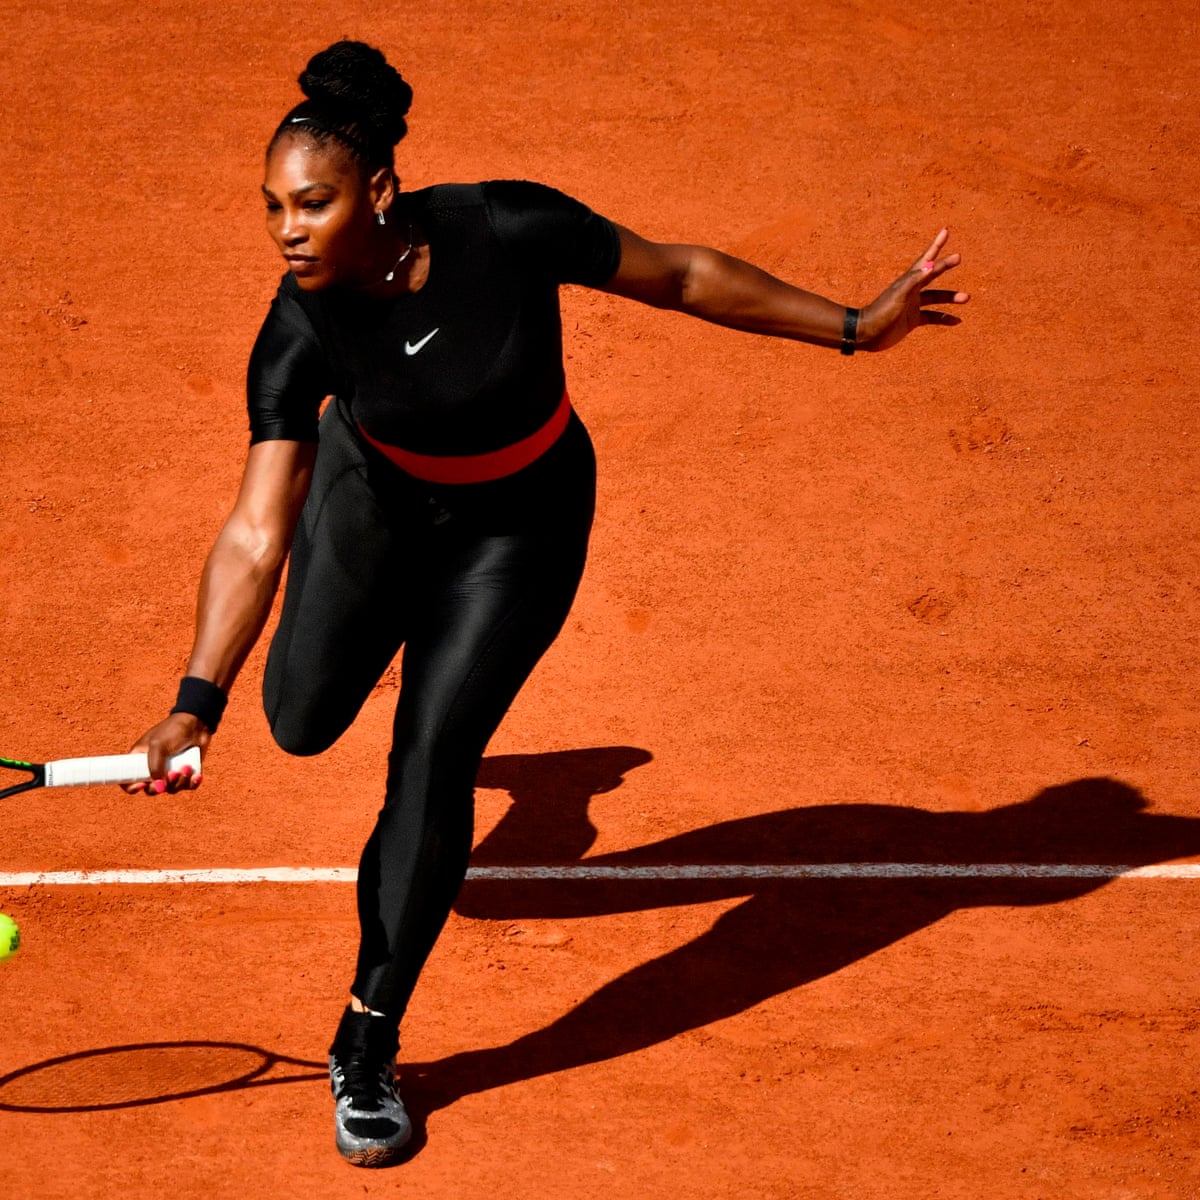 the ban on Serena Williams' catsuit says about the sexualising of women's bodies | Serena Williams | The Guardian